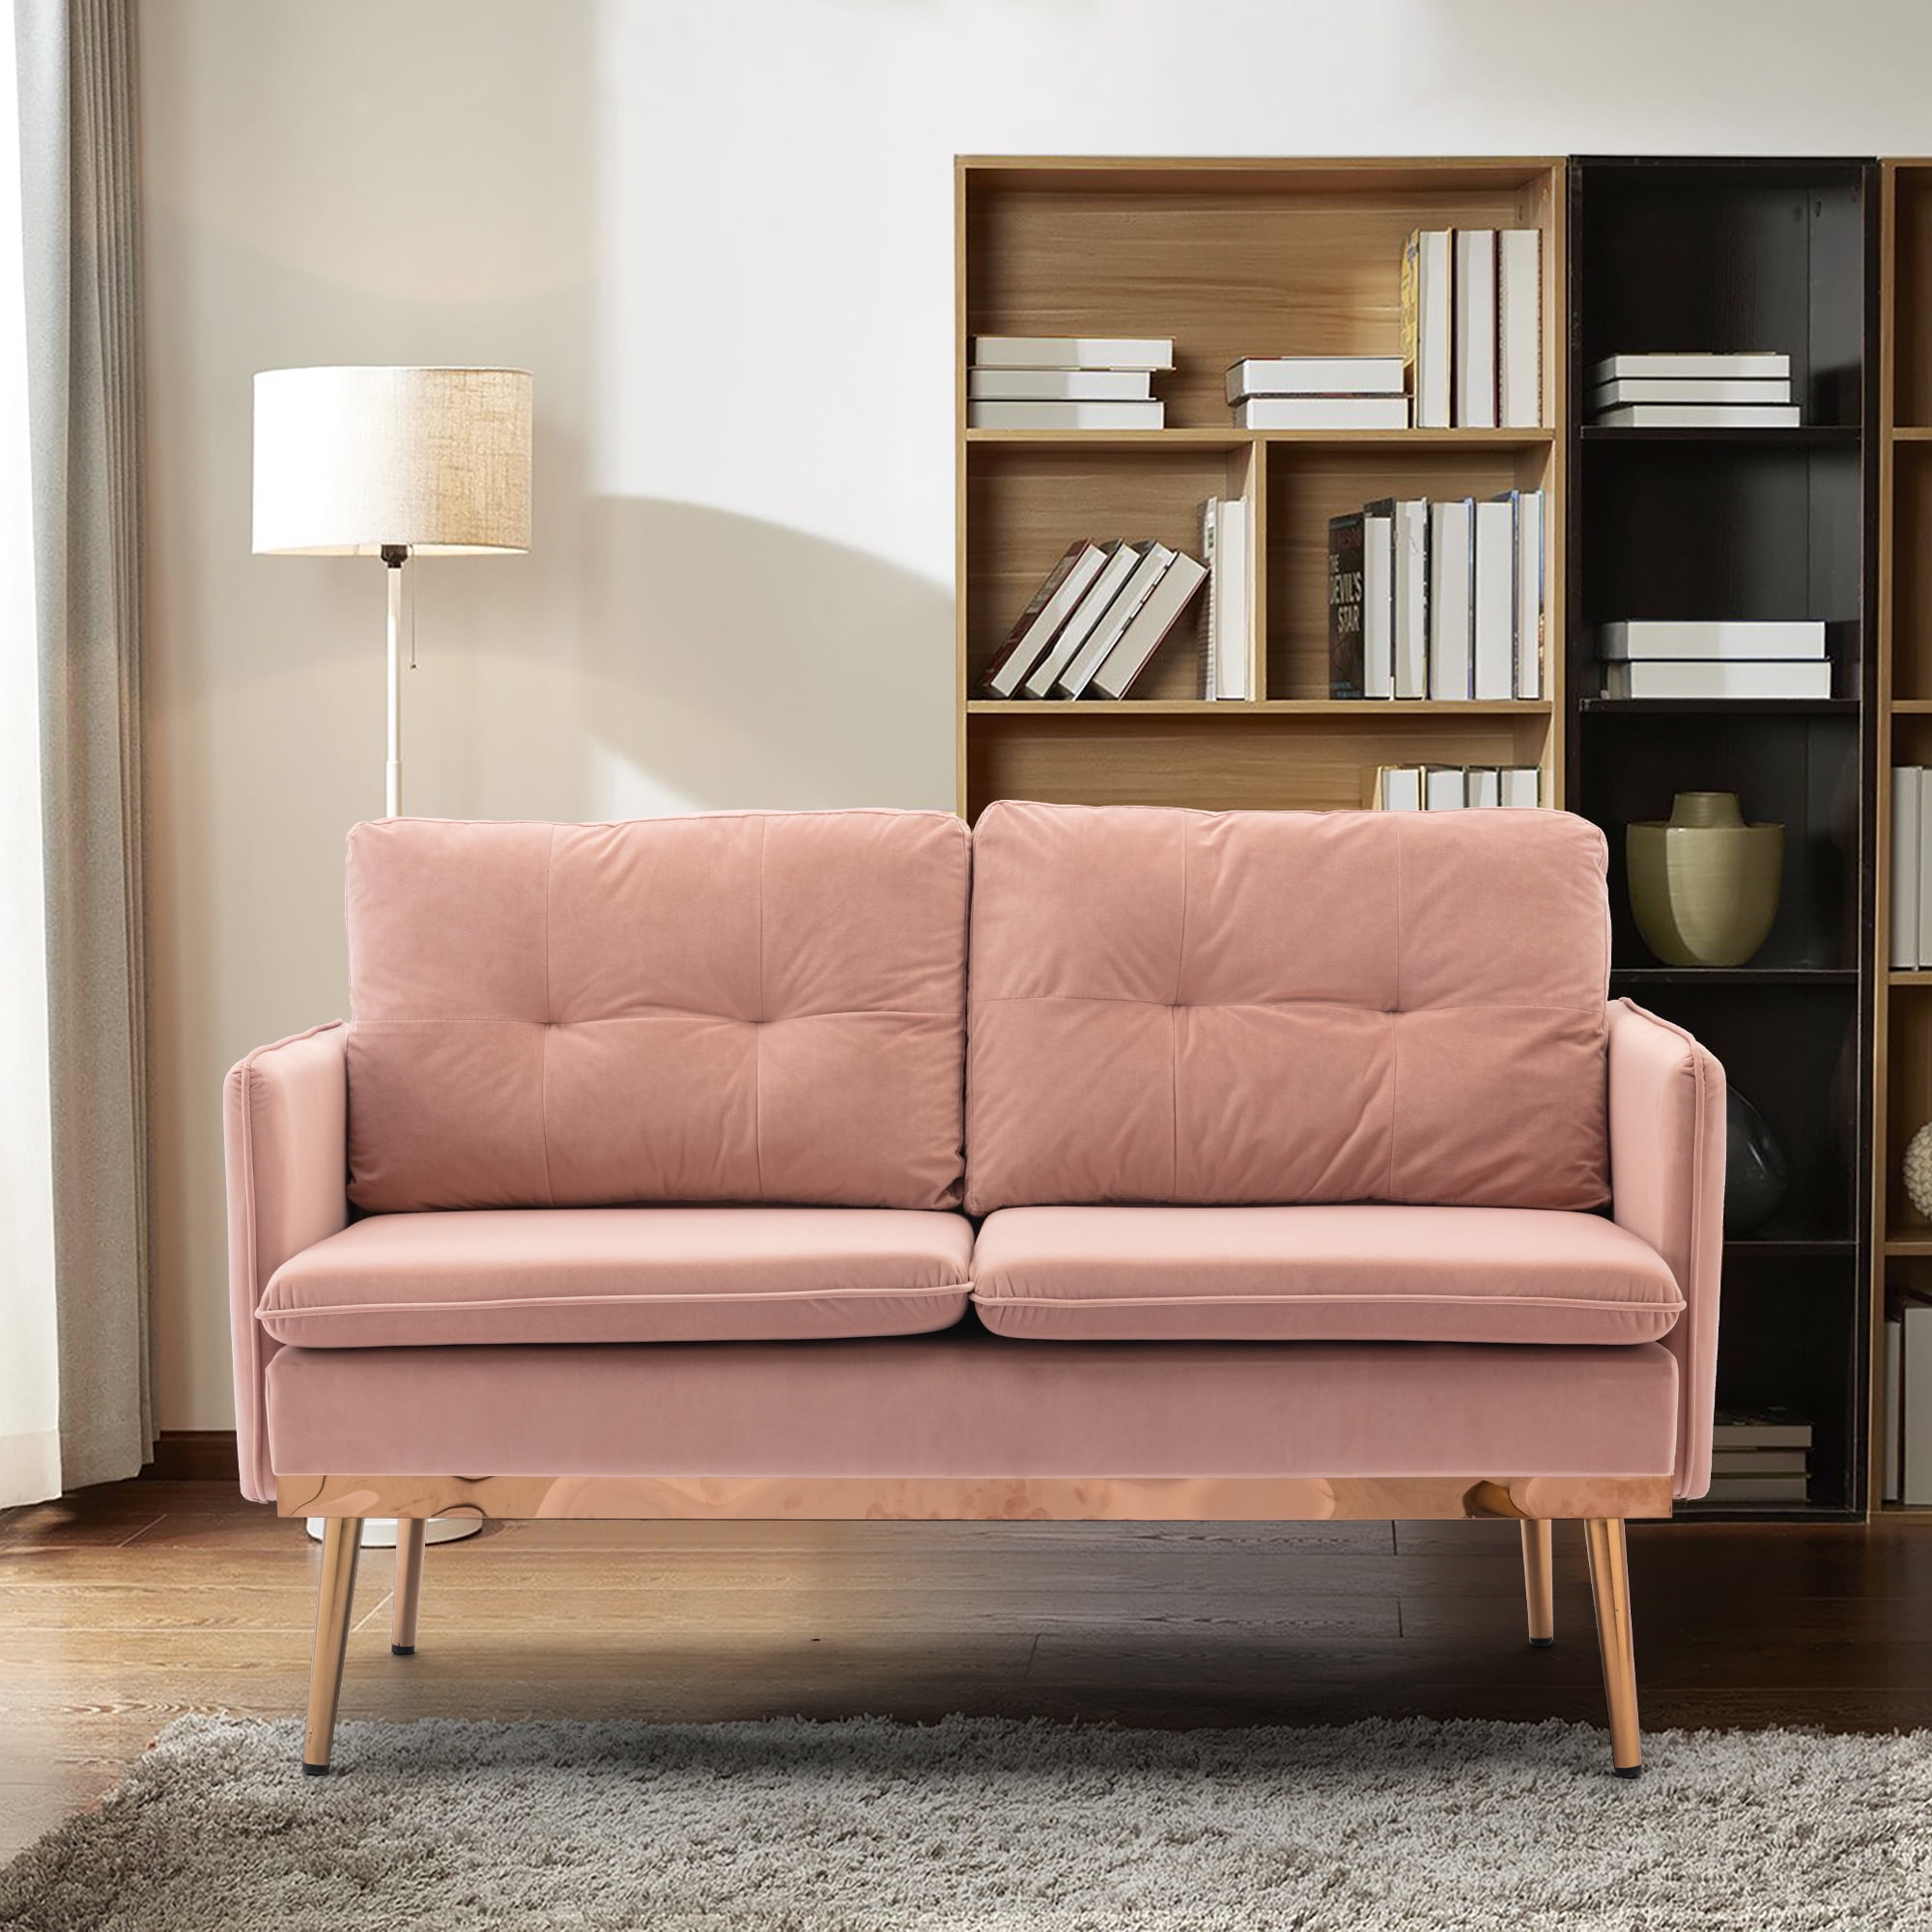 ucloveria loveseat sofa mini couch for bedroom upholstered love seats  furniture with metal legs/thick padding